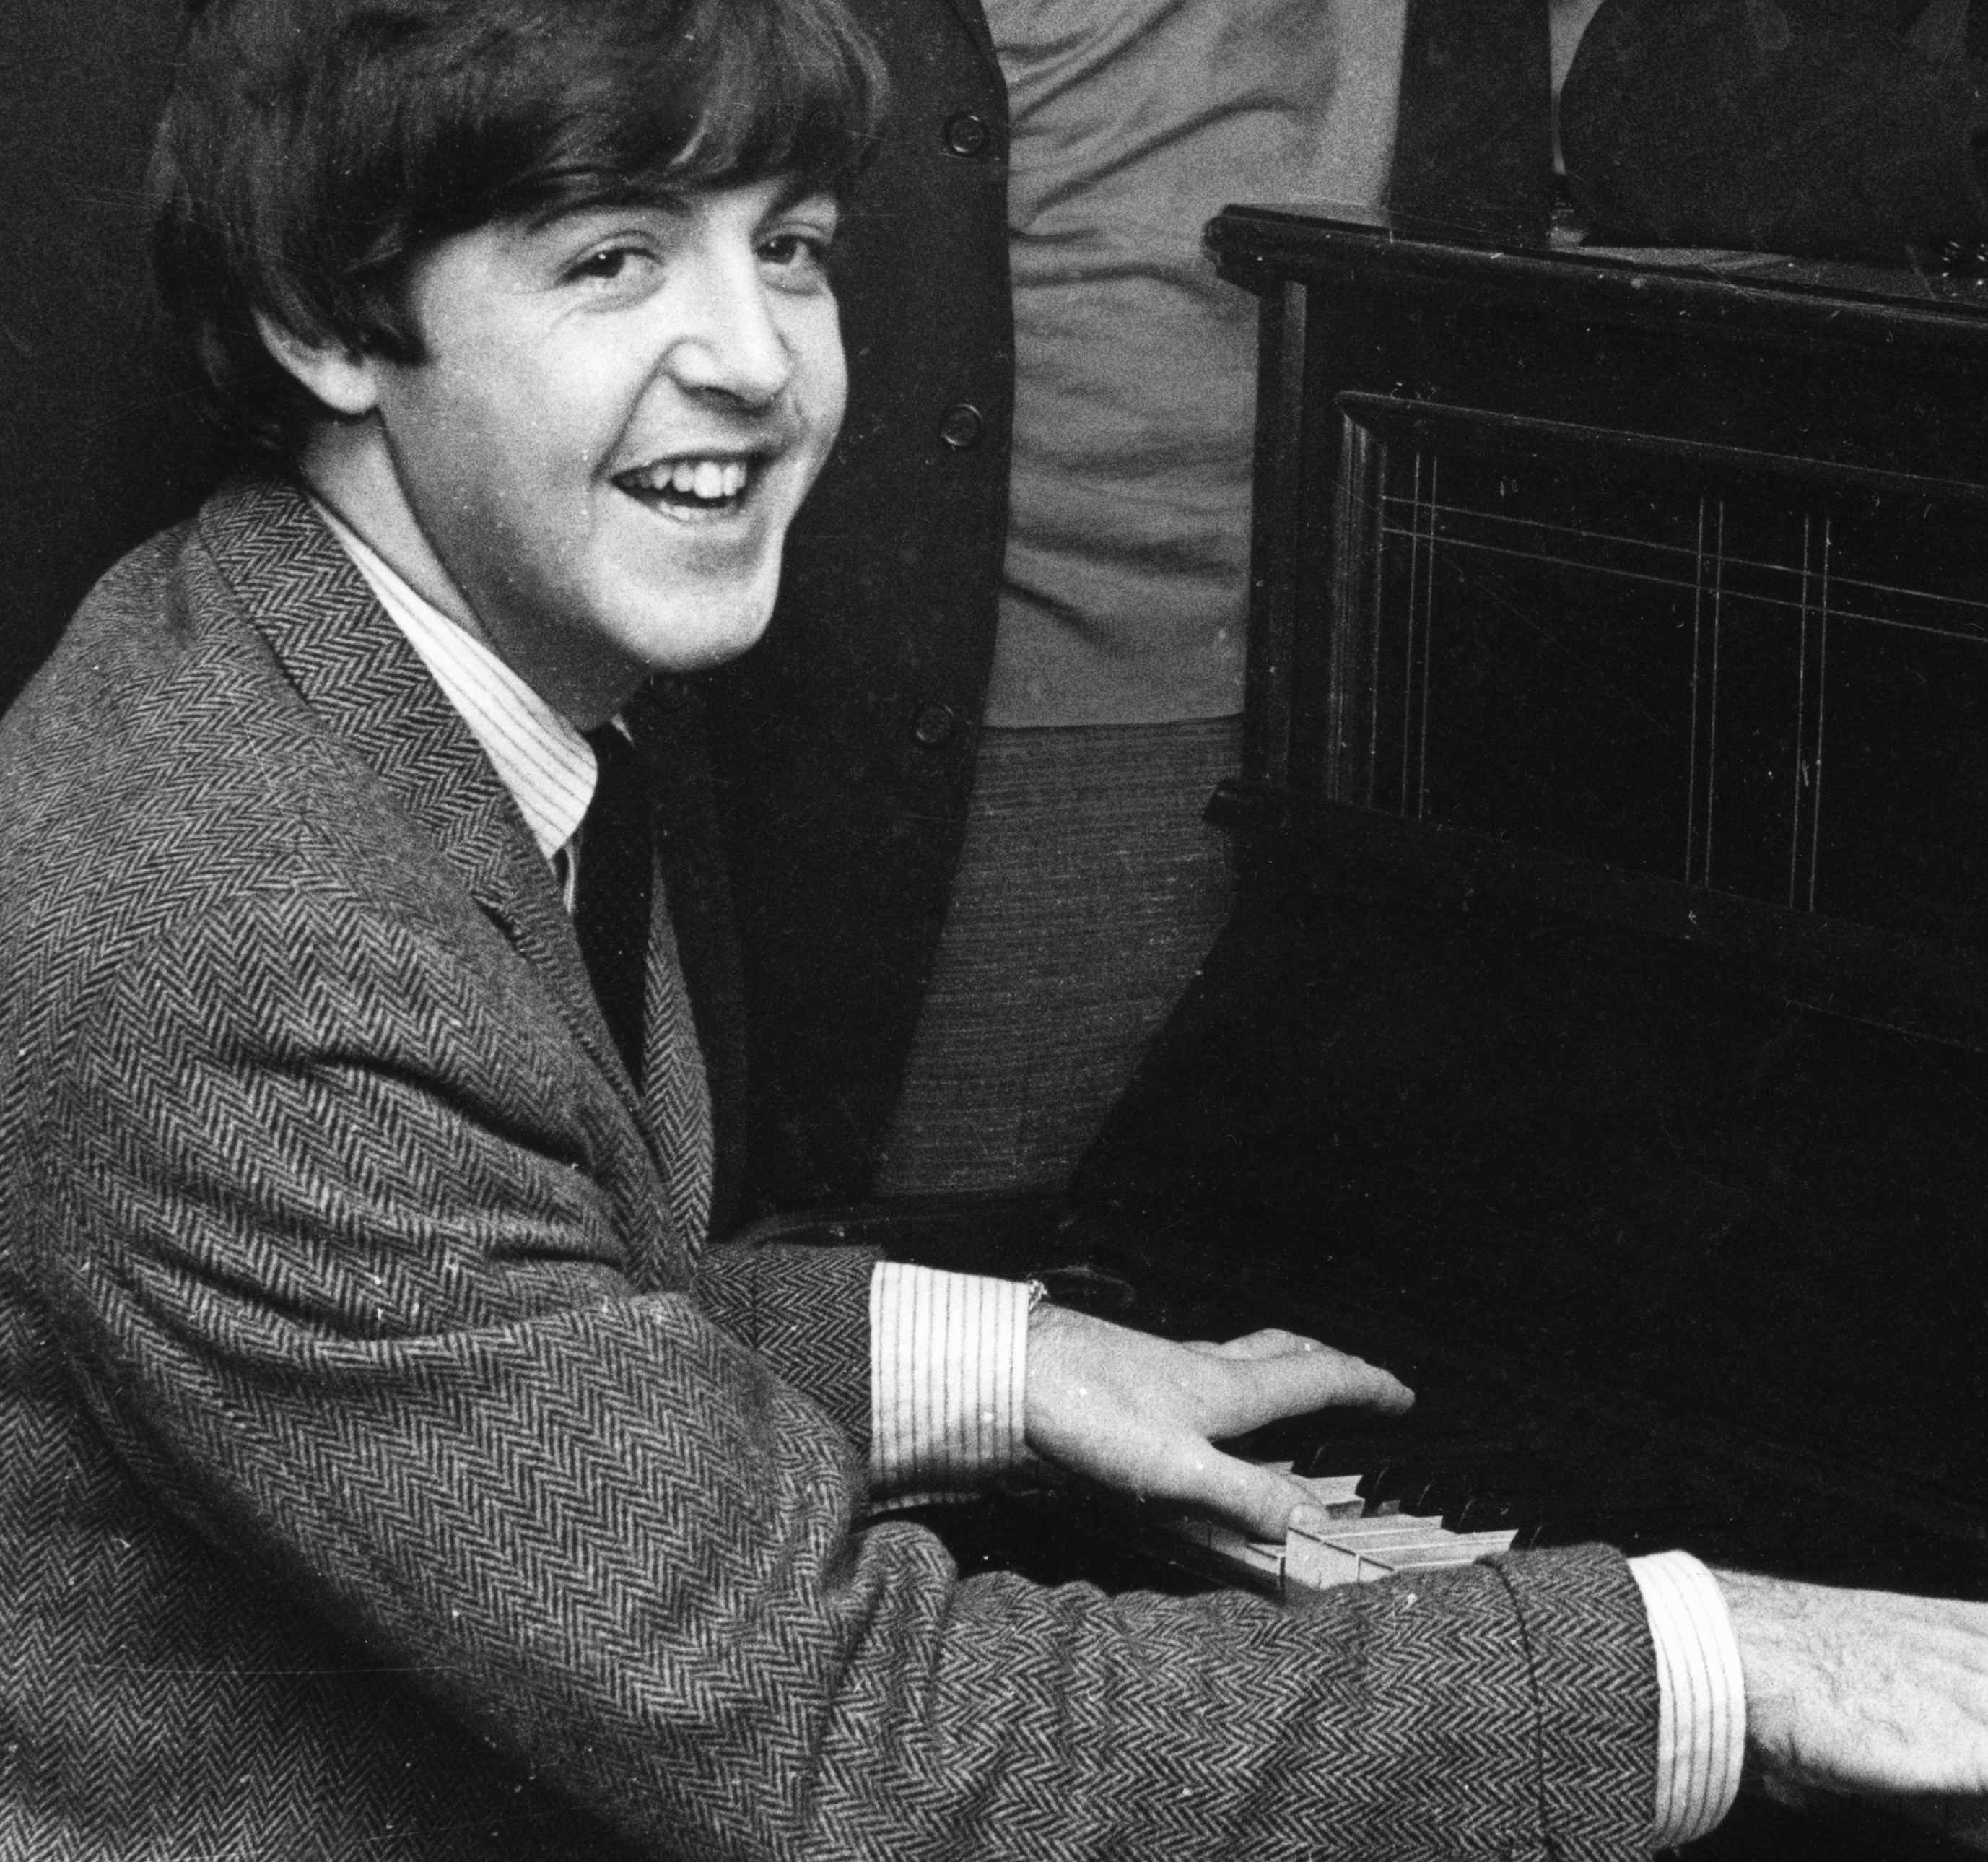 The Beatles' Paul McCartney playing a piano